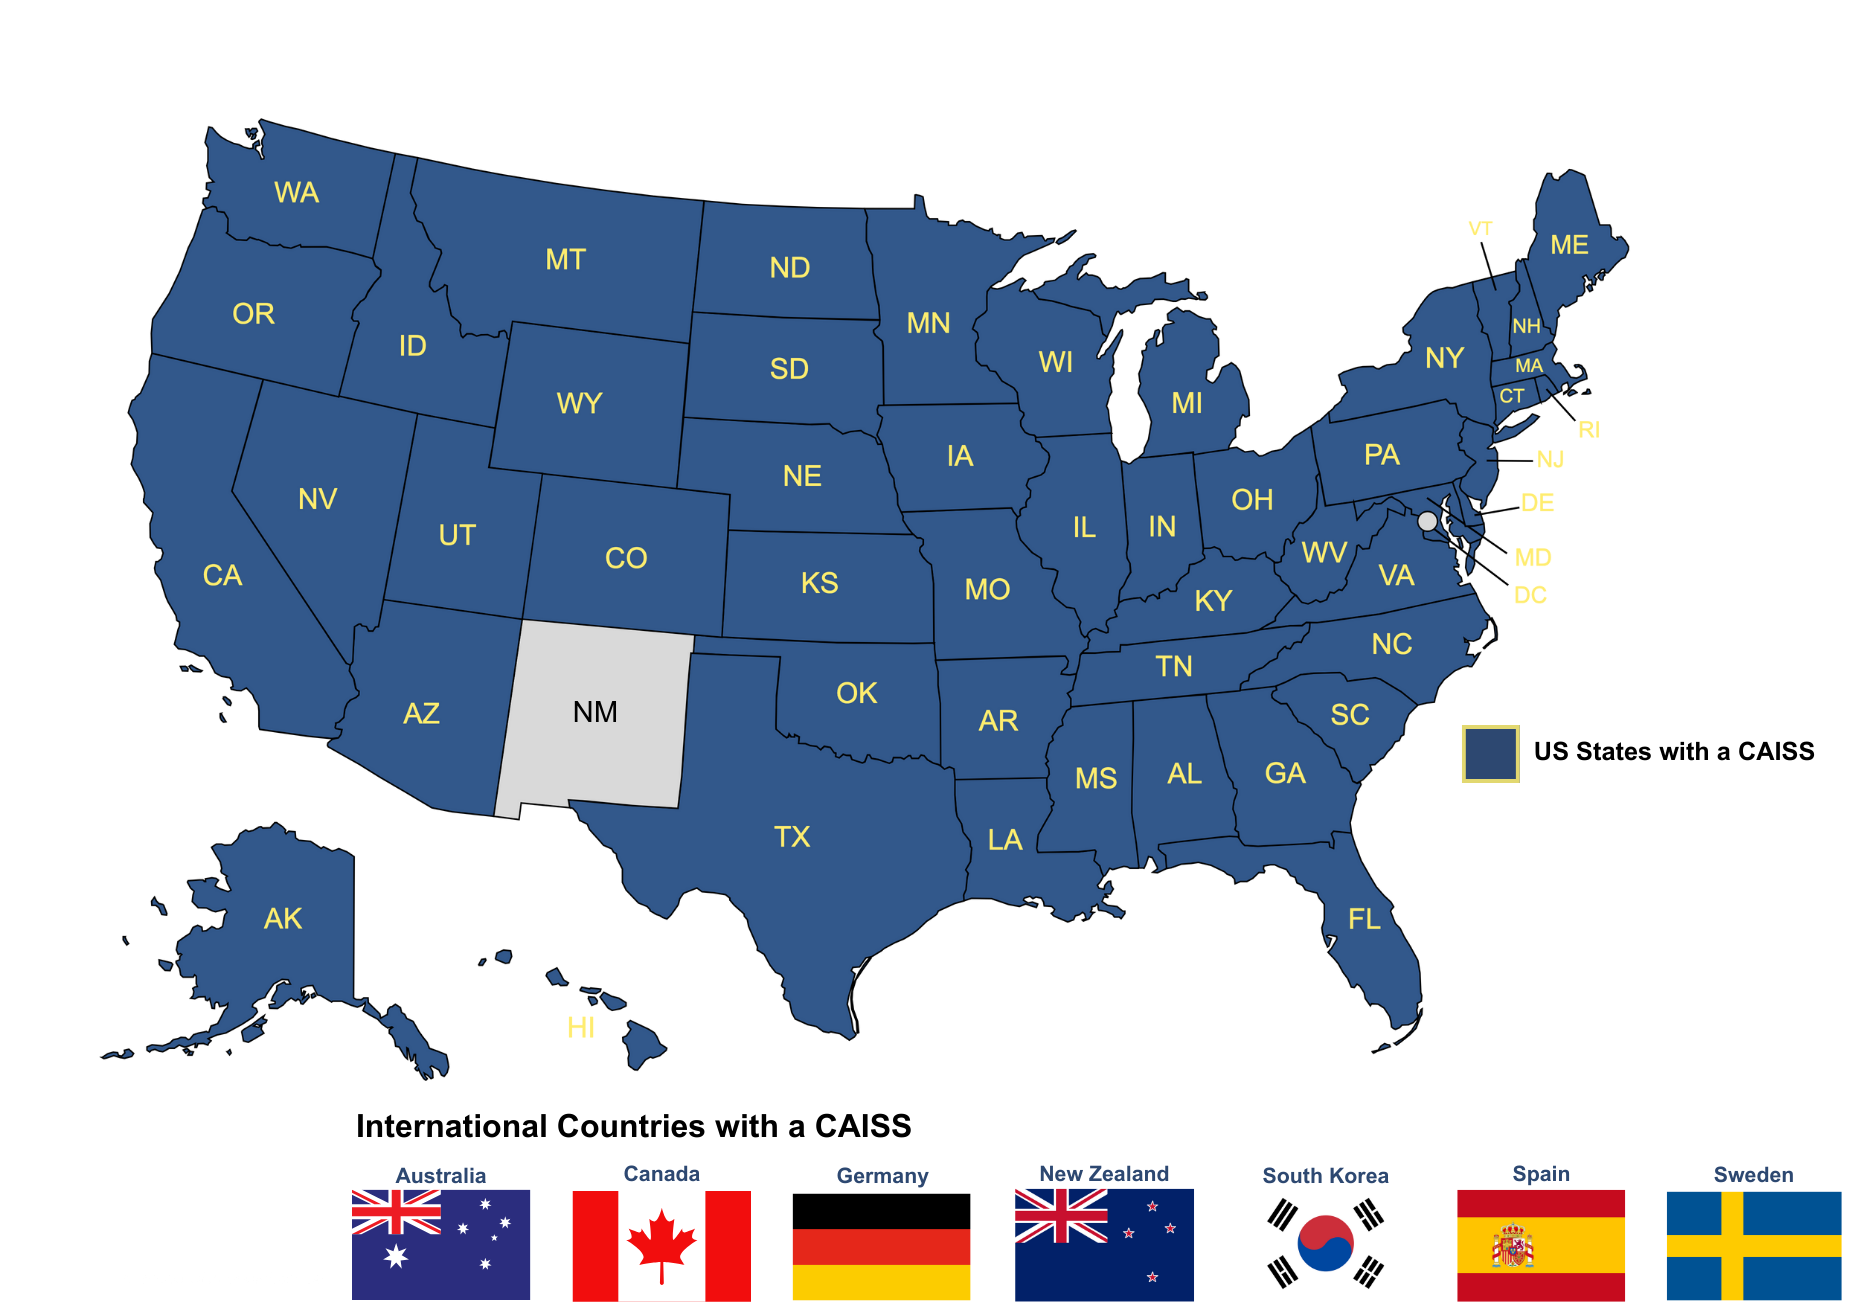 map of the united states of america with states shaded in blue to denote states that have a CAISS. Also includes international country flags of canada, spain, and sweden